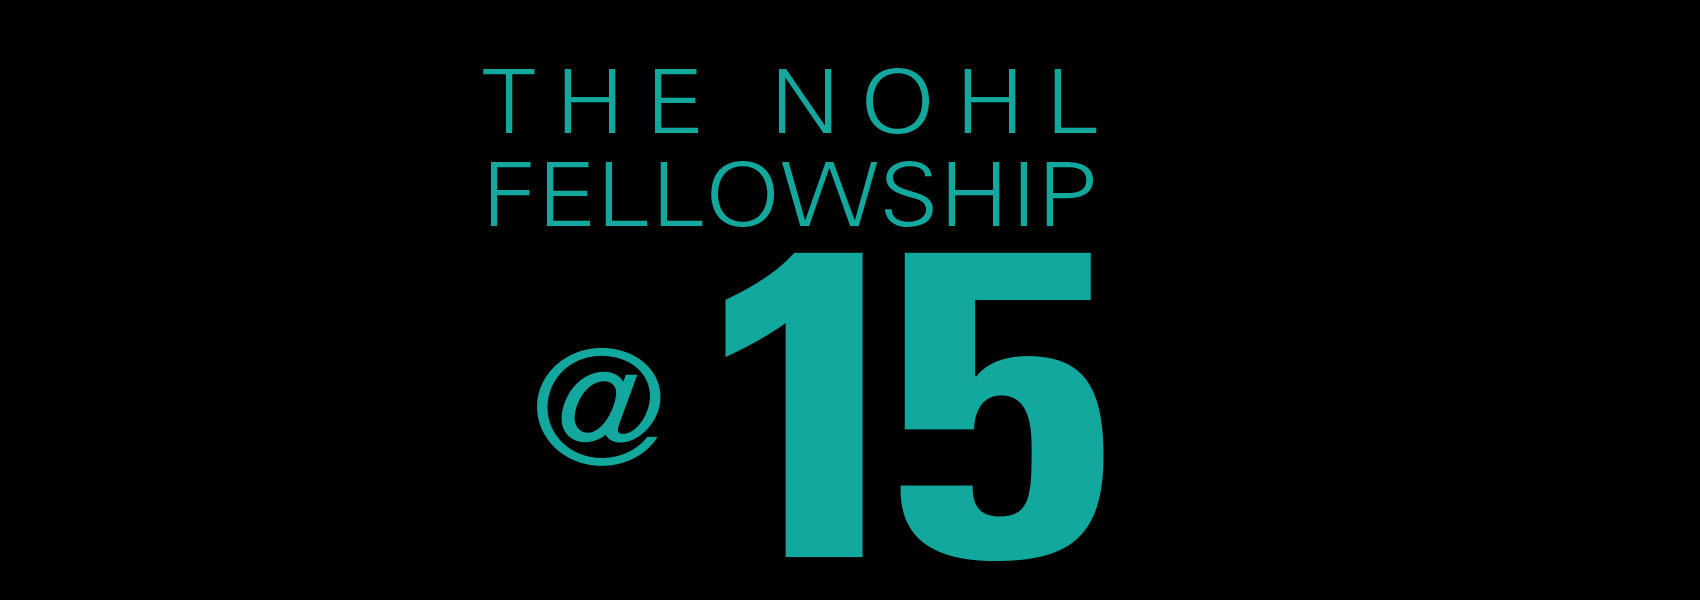 The Nohl Fellowship at 15 